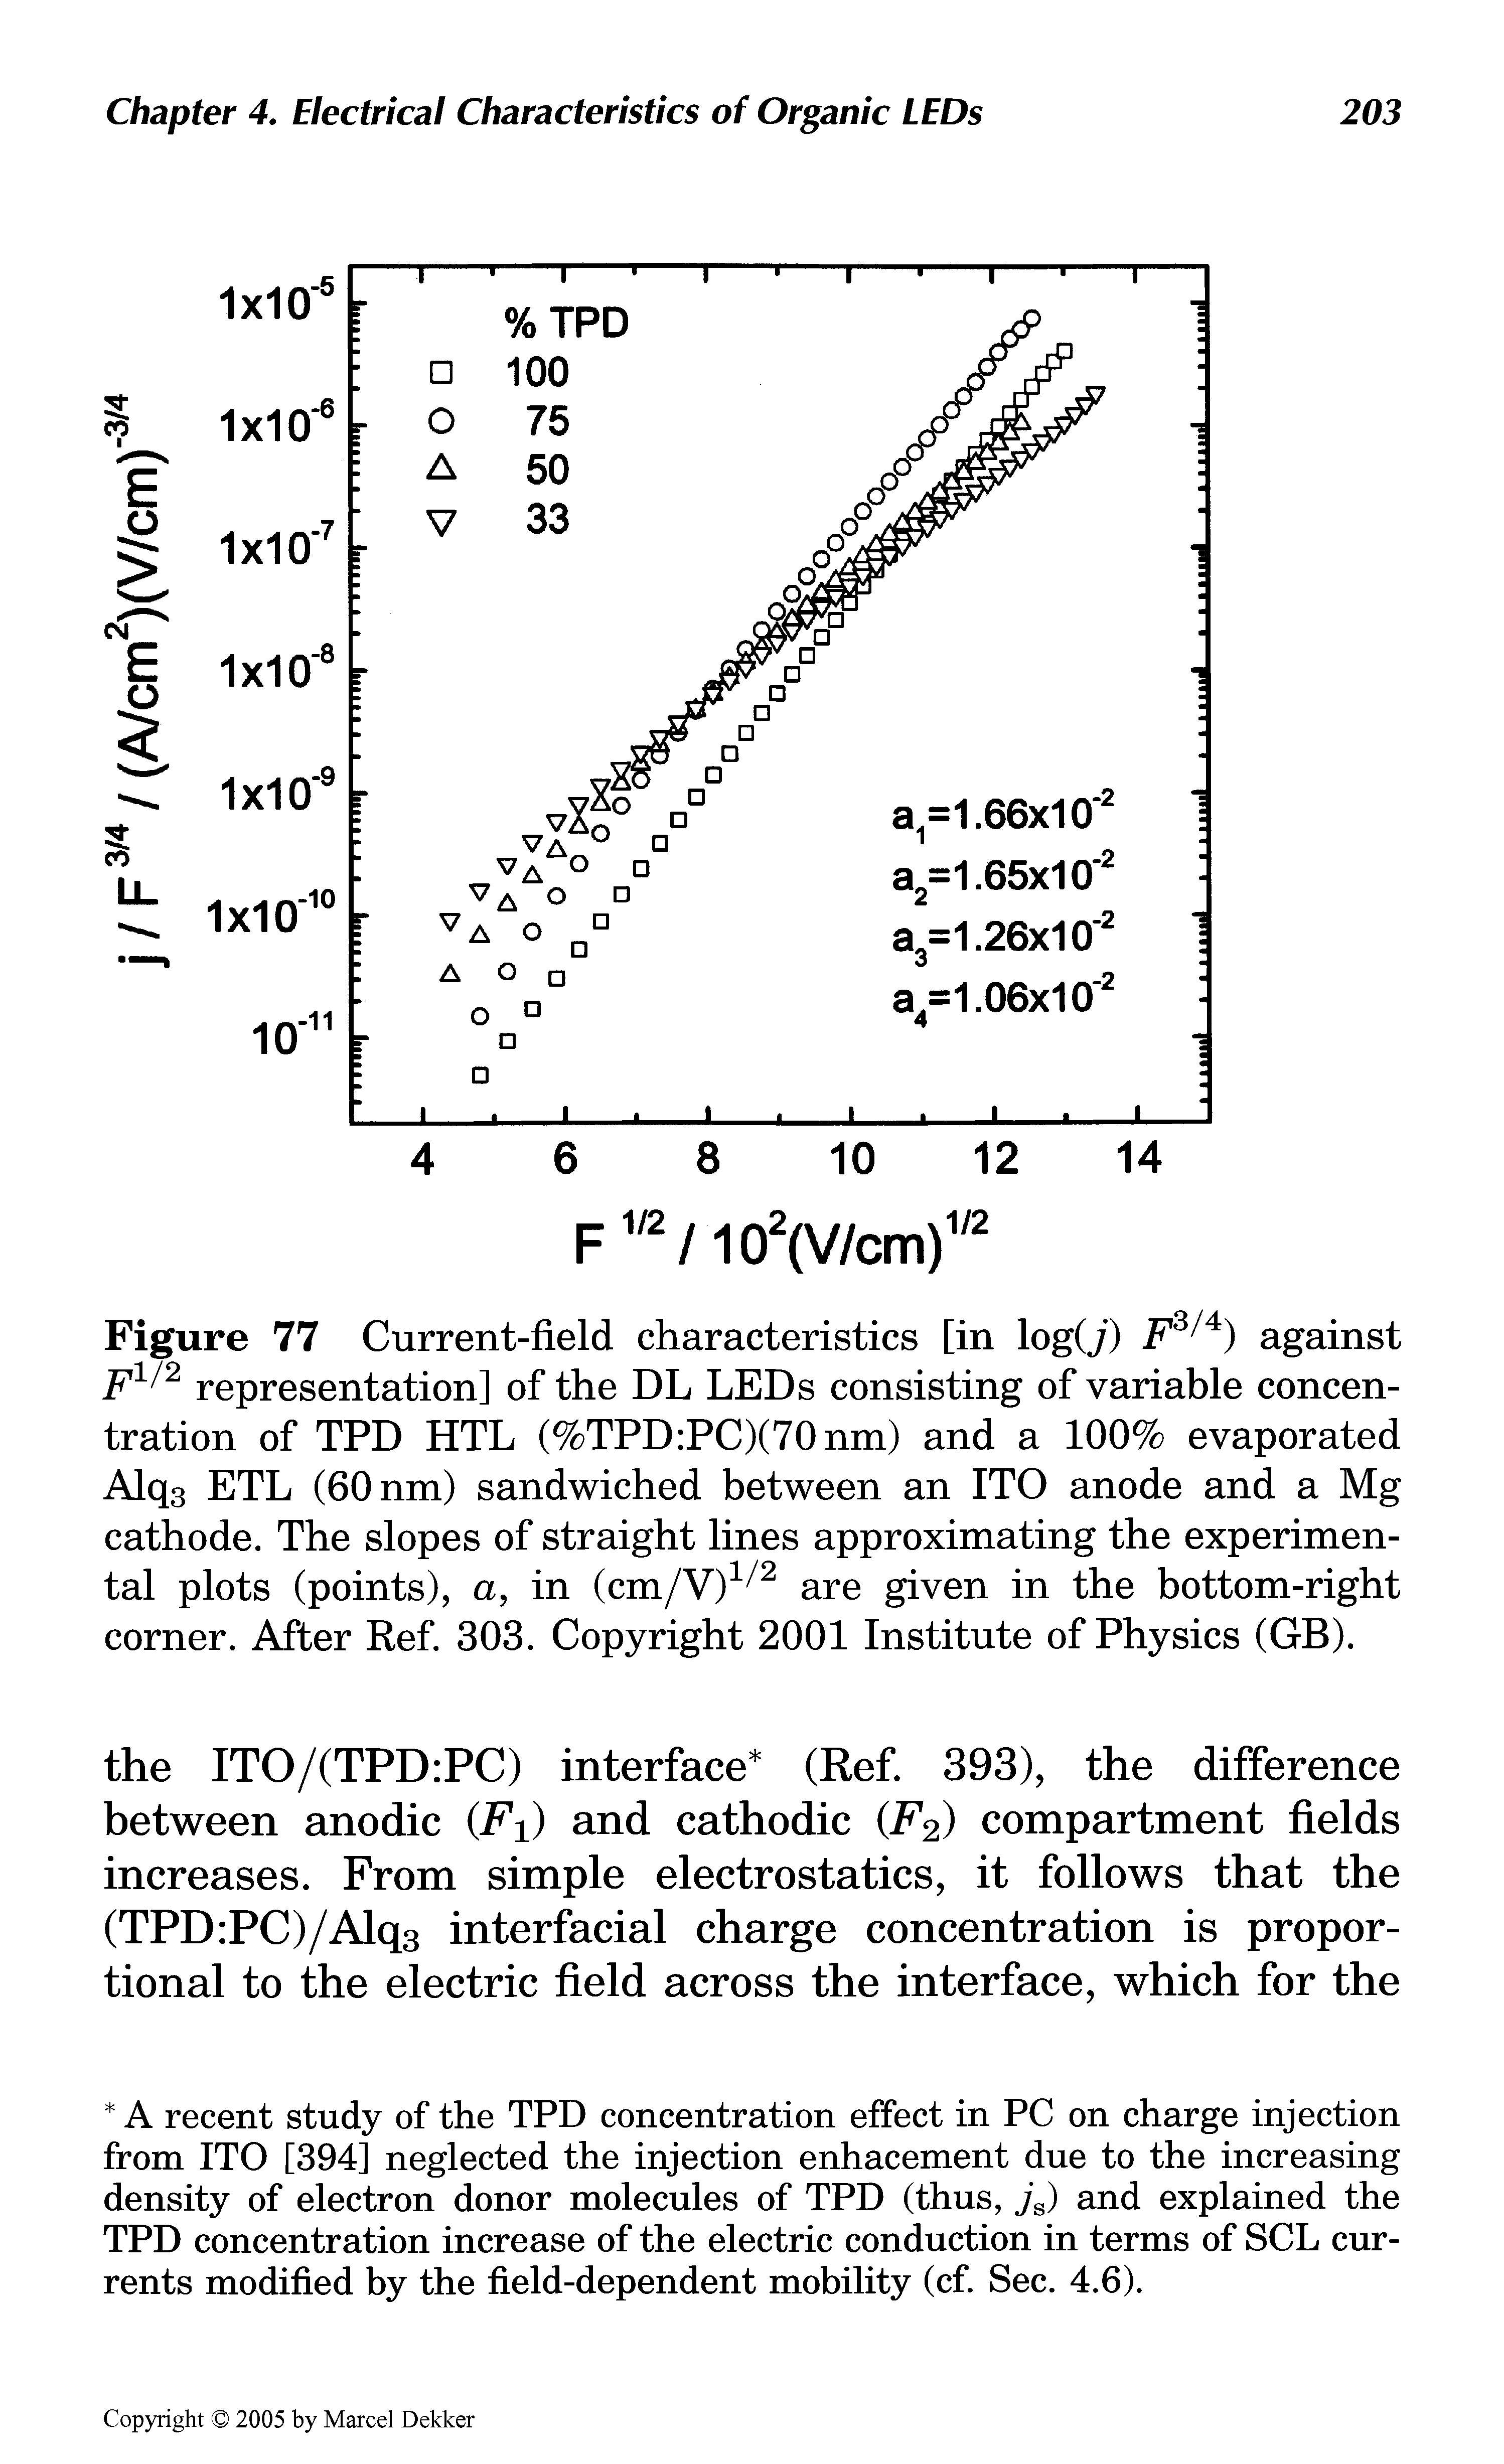 Figure 77 Current-field characteristics [in log(j) F3 4) against F1/2 representation] of the DL LEDs consisting of variable concentration of TPD HTL (%TPD PC)(70nm) and a 100% evaporated Alq3 ETL (60 nm) sandwiched between an ITO anode and a Mg cathode. The slopes of straight lines approximating the experimental plots (points), a, in (cm/V)1 2 are given in the bottom-right corner. After Ref. 303. Copyright 2001 Institute of Physics (GB).